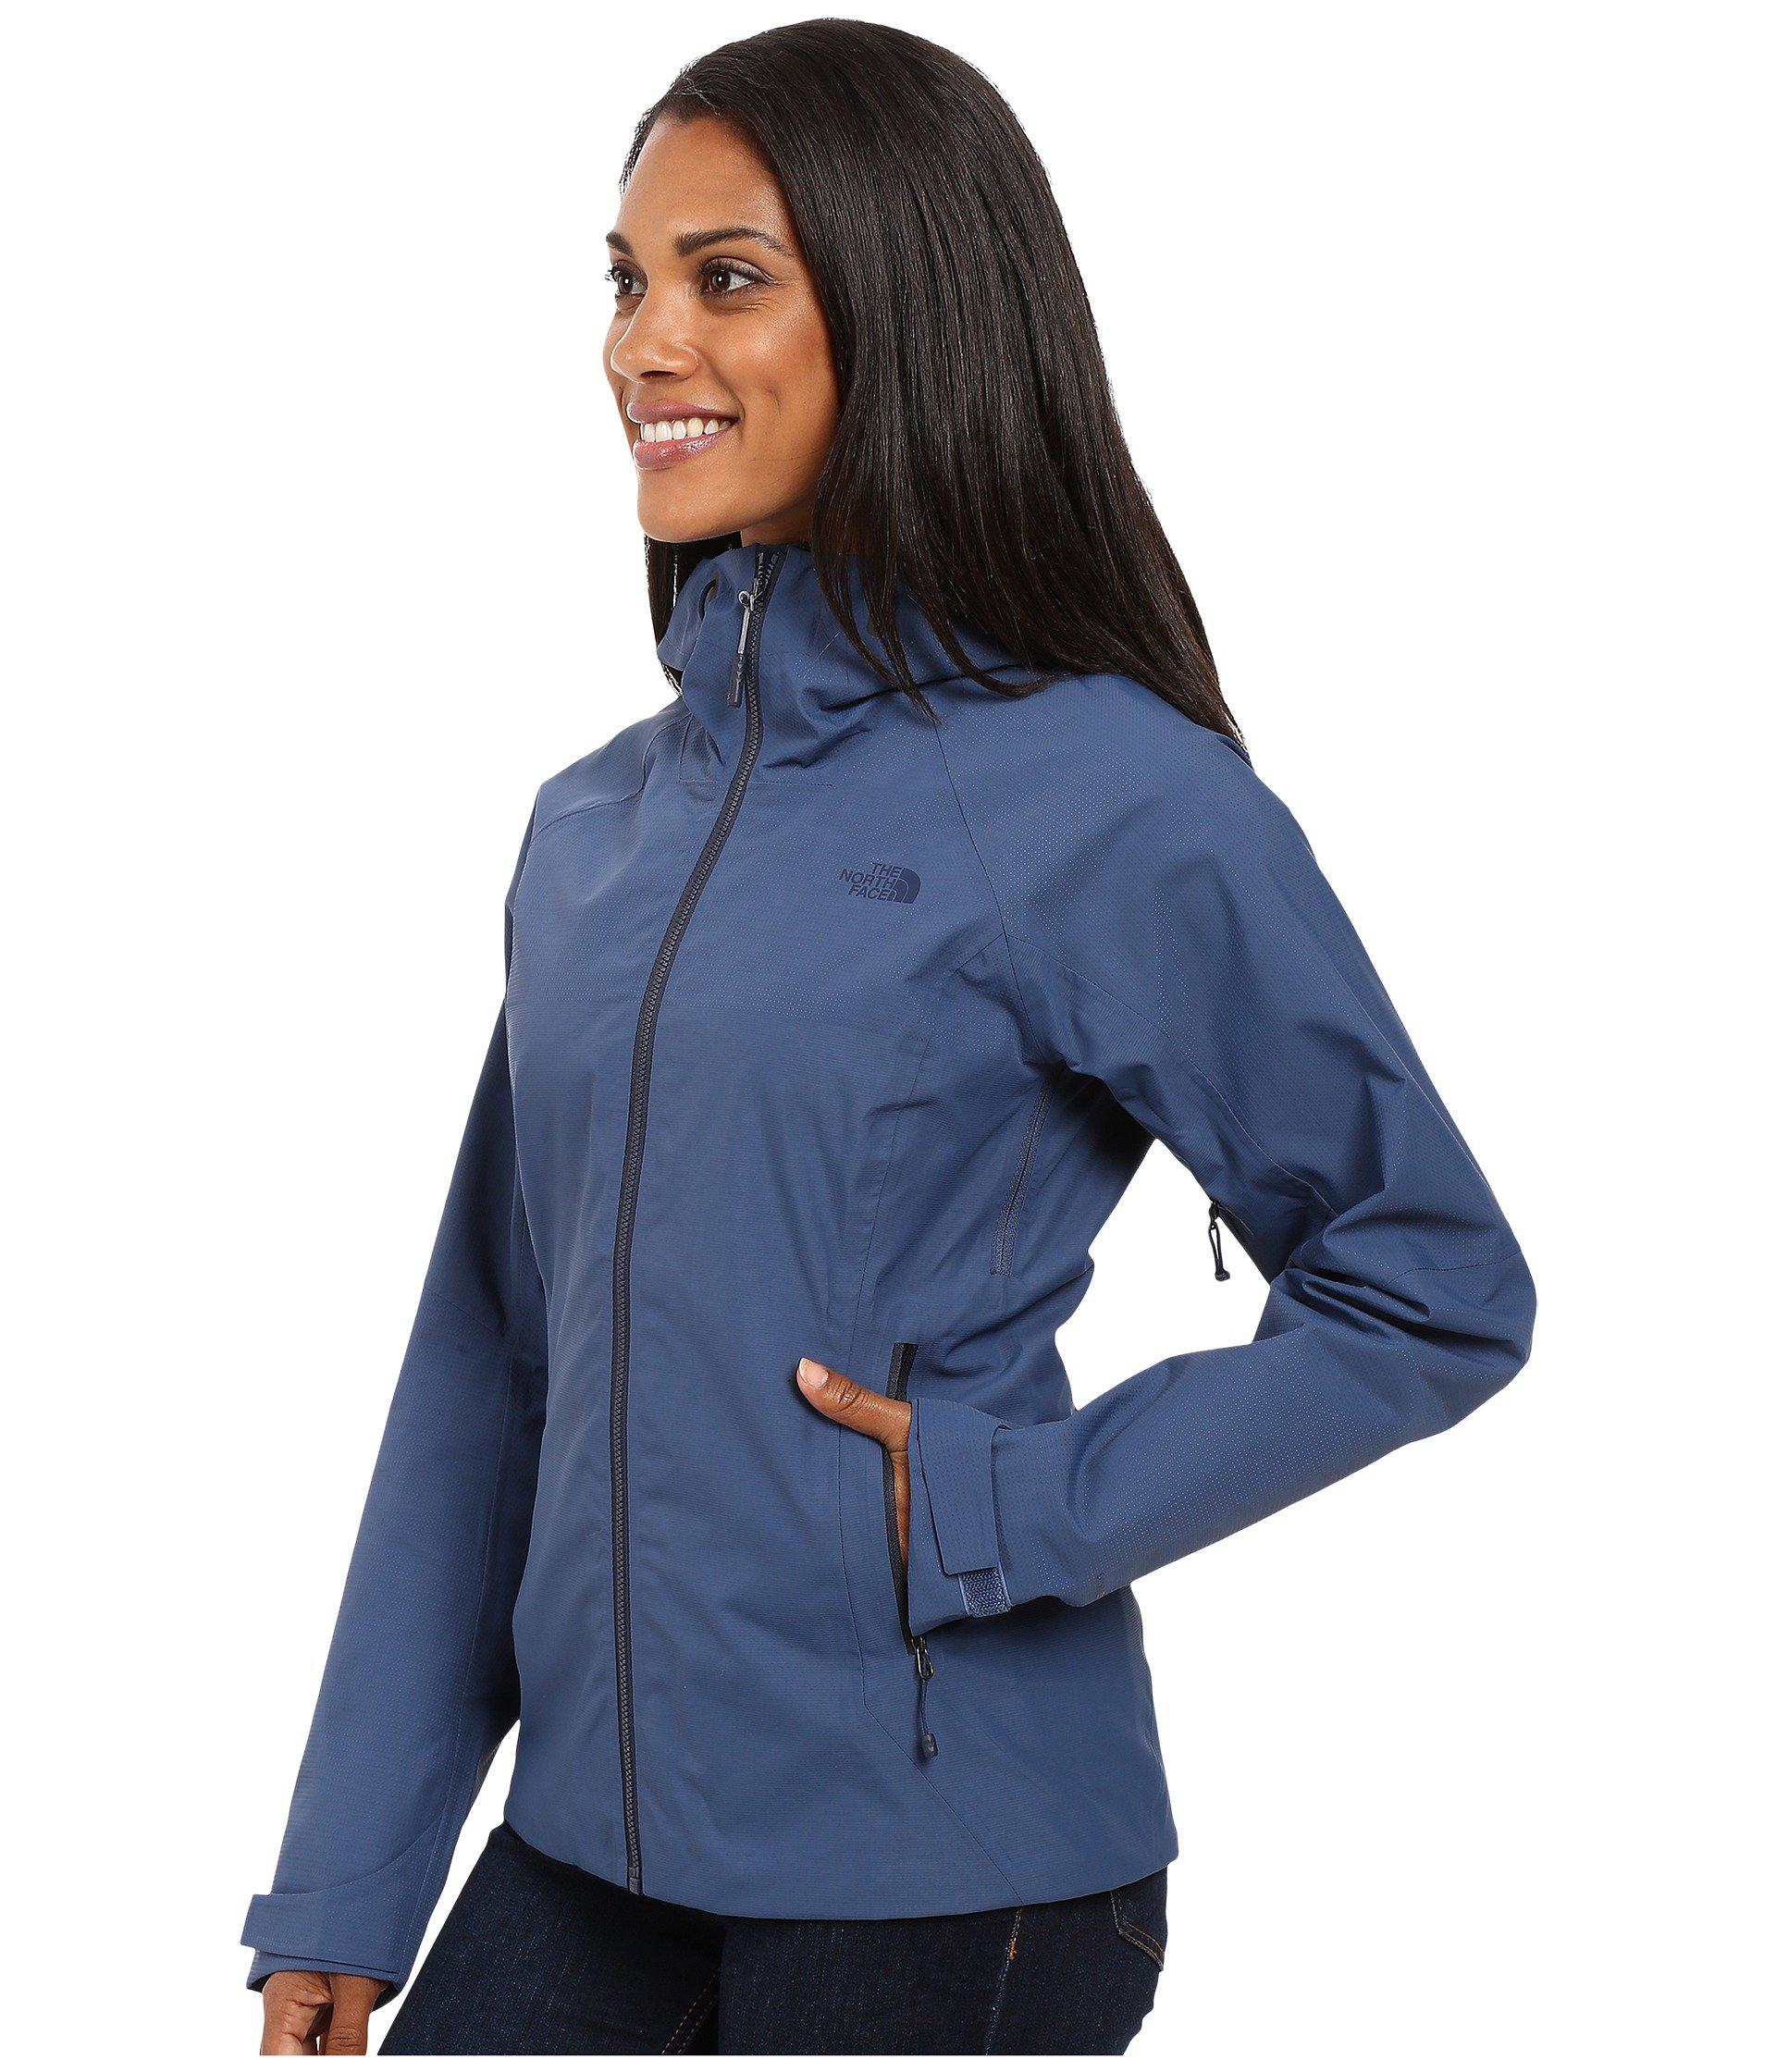 the north face fuseform apoc jacket